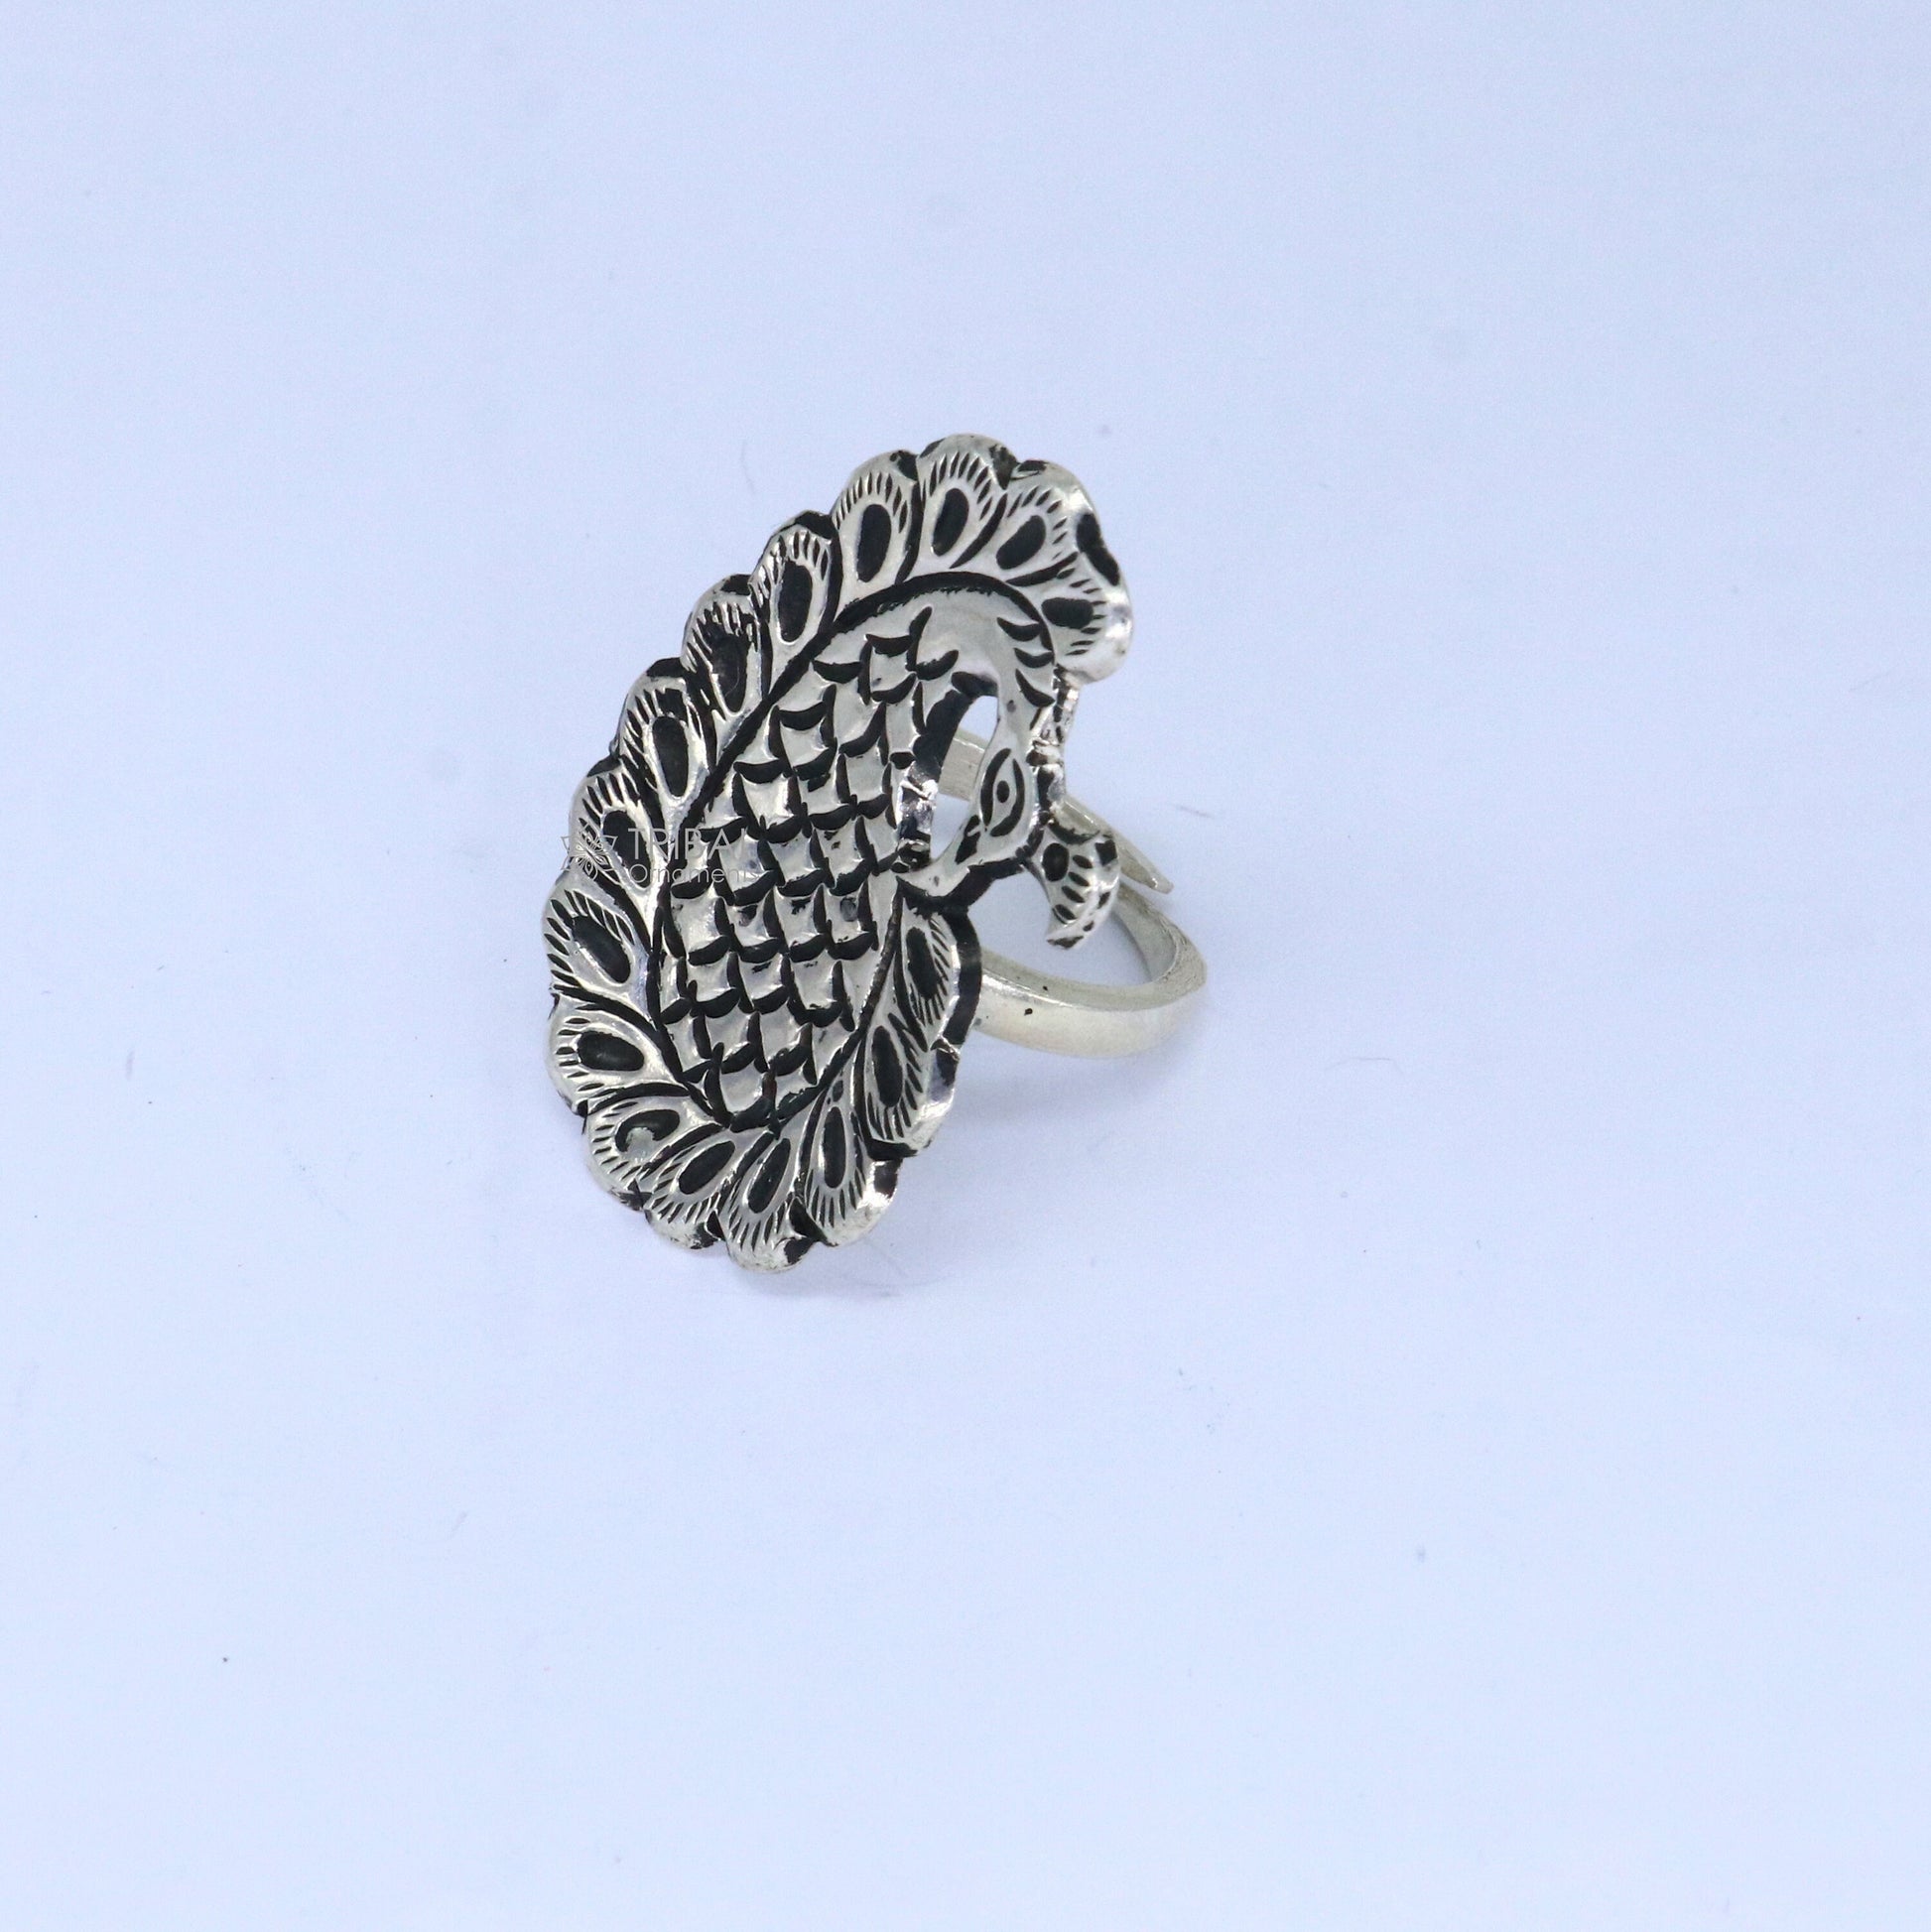 Peacock design Indian Classical cultural 925 sterling silver adjustable ring, best tribal ethnic jewelry Navratri jewelry sr395 - TRIBAL ORNAMENTS